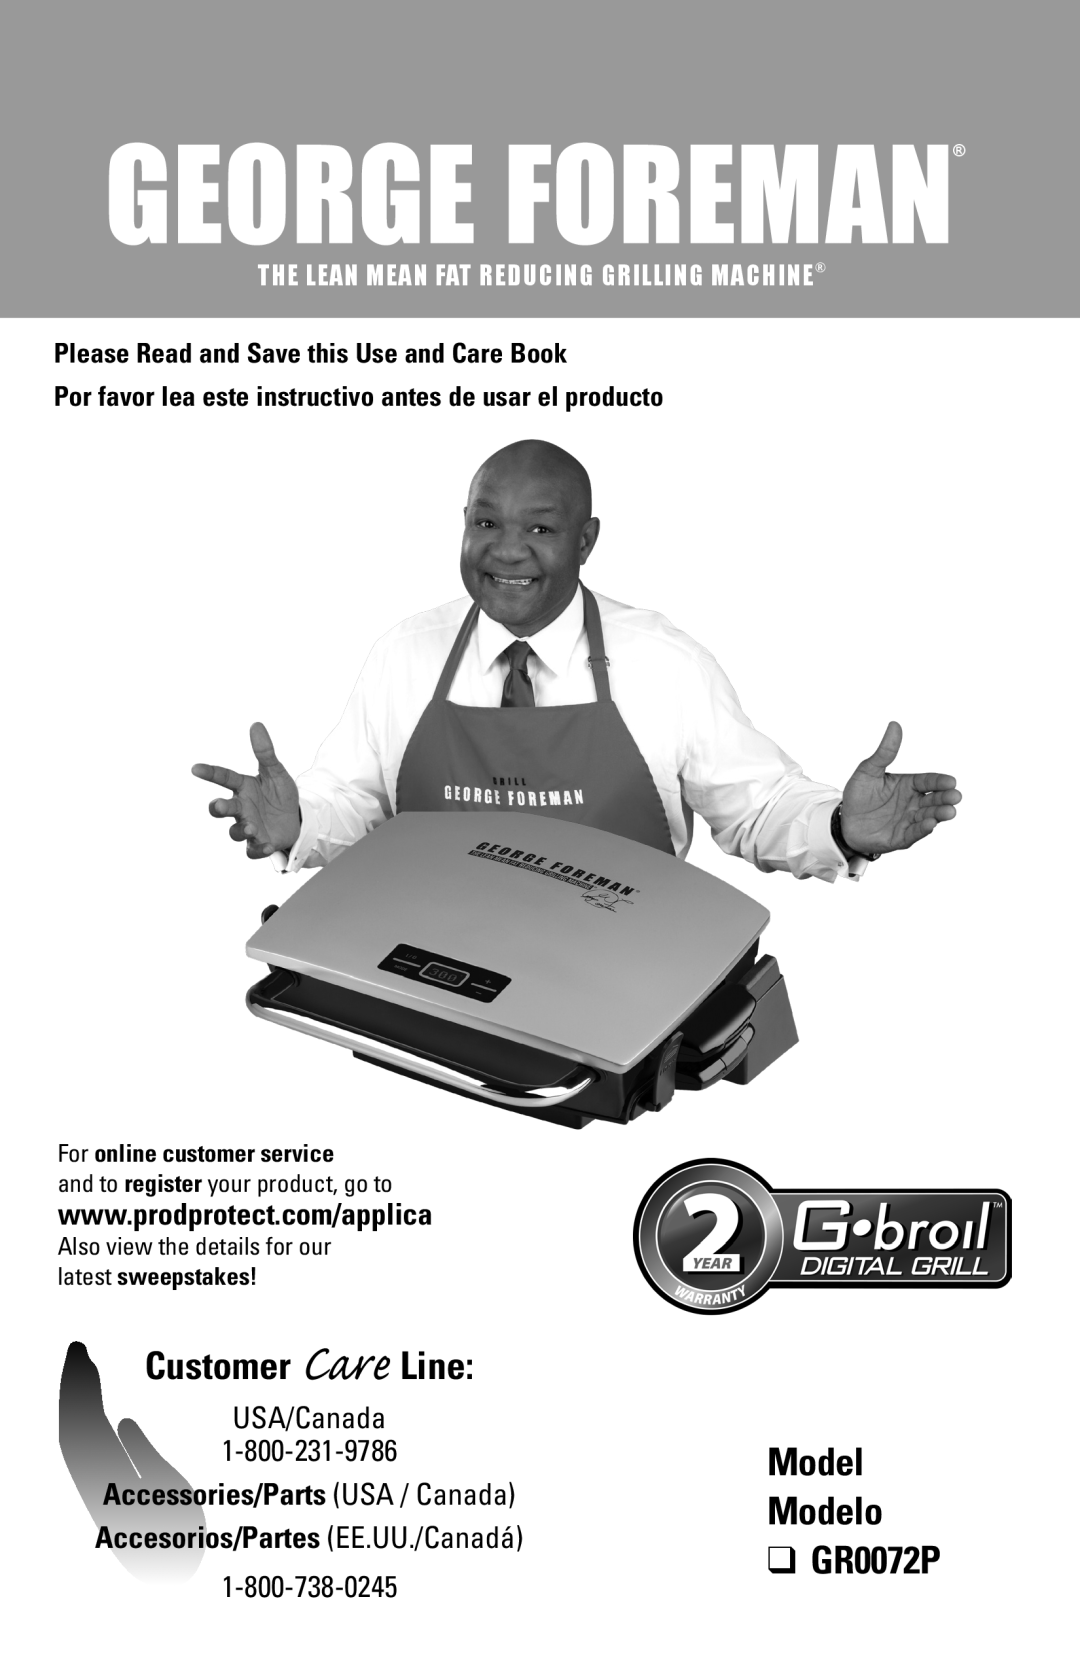 George Foreman manual Customer Care Line, Model Modelo GR0072P, The Lean Mean Fat Reducing Grilling Machine 